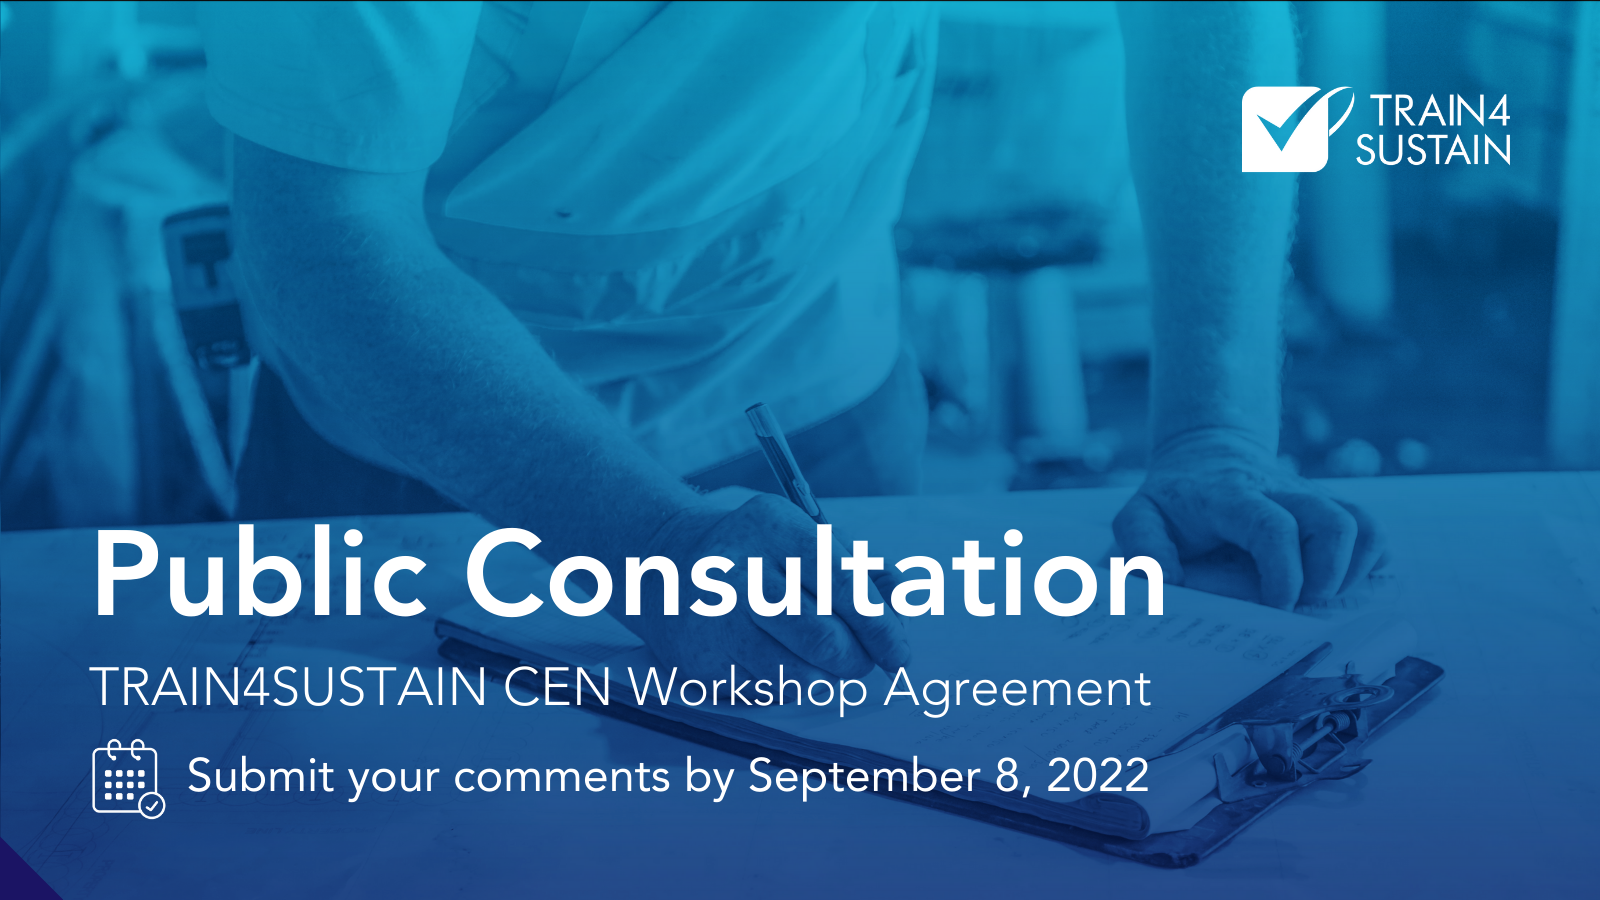 The TRAIN4SUSTAIN CEN Workshop Agreement (CWA) is now available for Public Consultation until September 8th